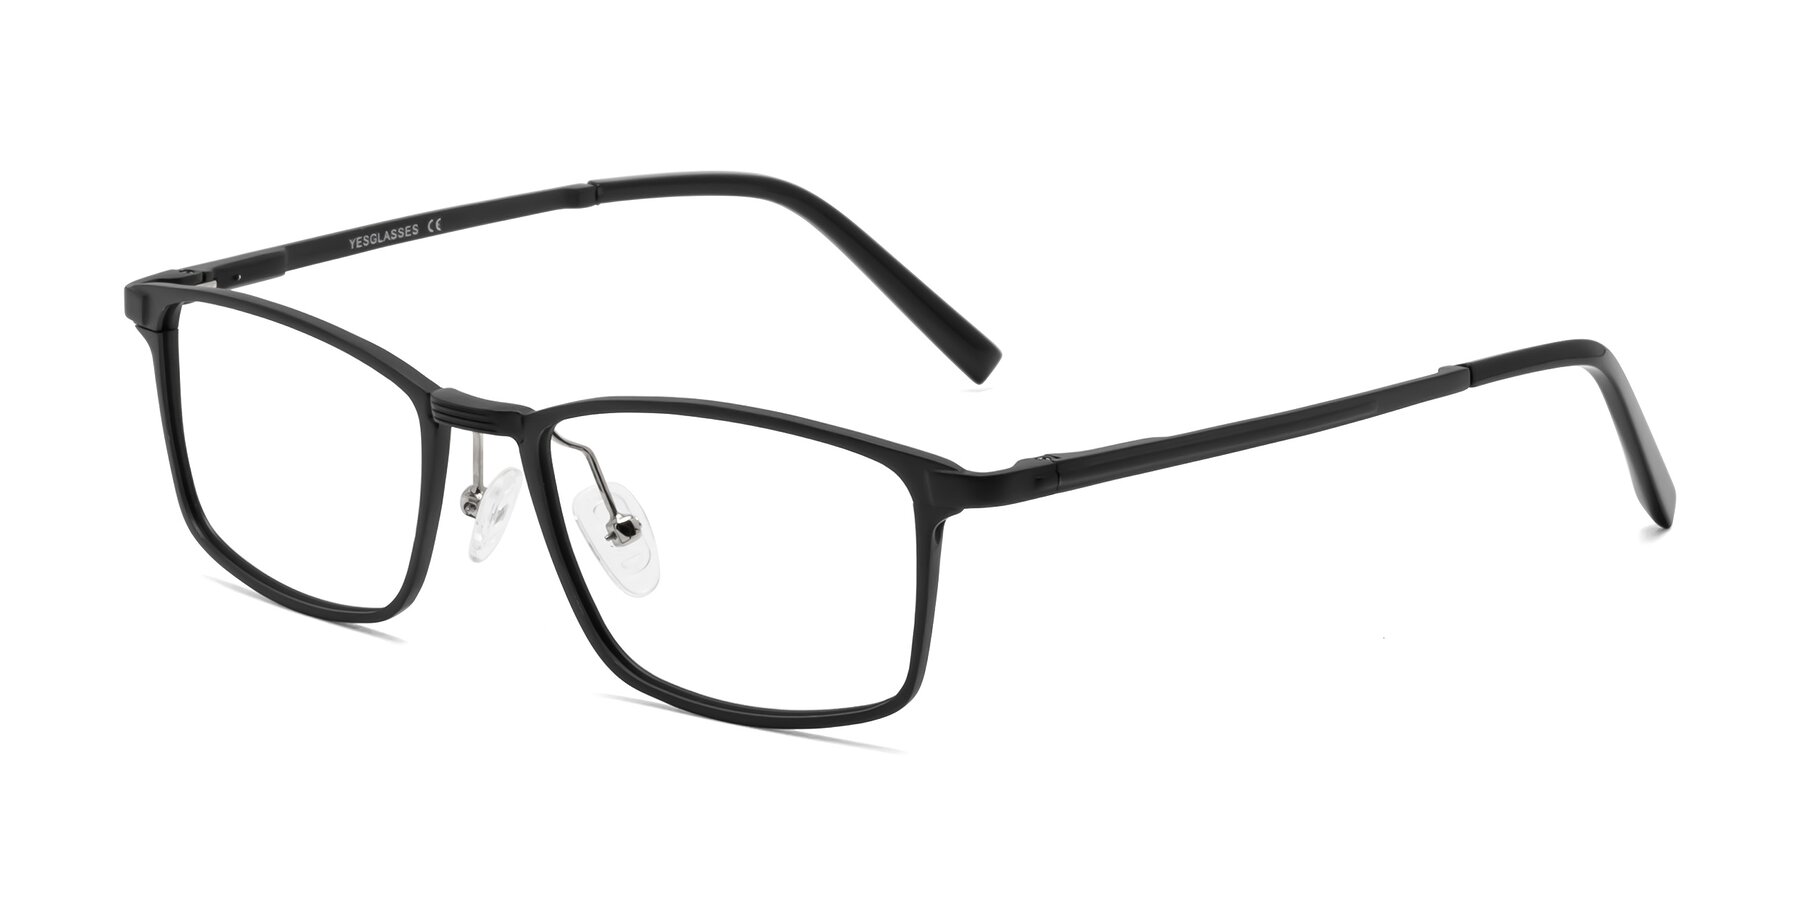 Angle of CX6298 in Black with Clear Eyeglass Lenses